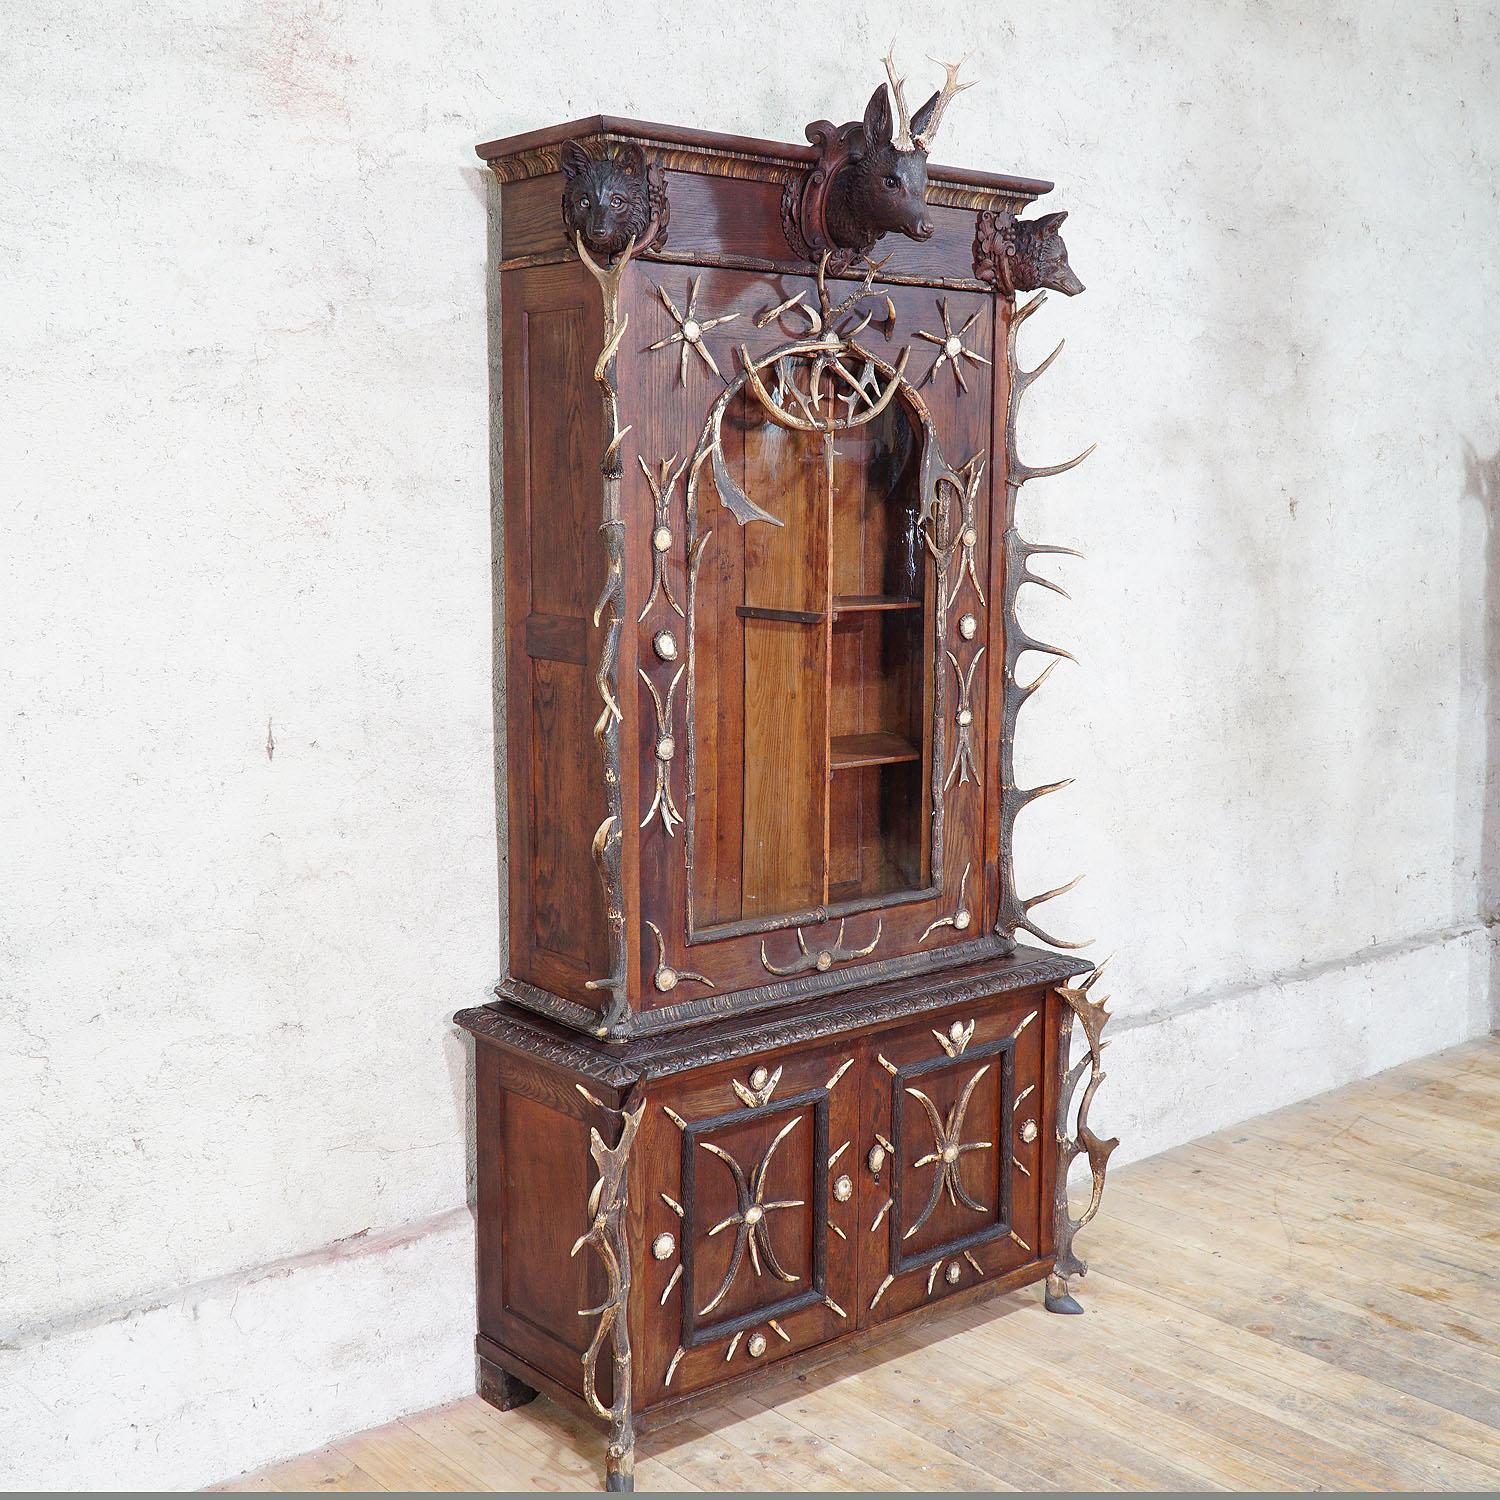 Large antique antler gun cabinet Bohemia, ca. 1870

A large gun cabinet from a noble hunting estate in Bohemia. The massive oak cabinet is richly decorated with original horn from the deer, the fallow deer and turned horn roses. On top it features